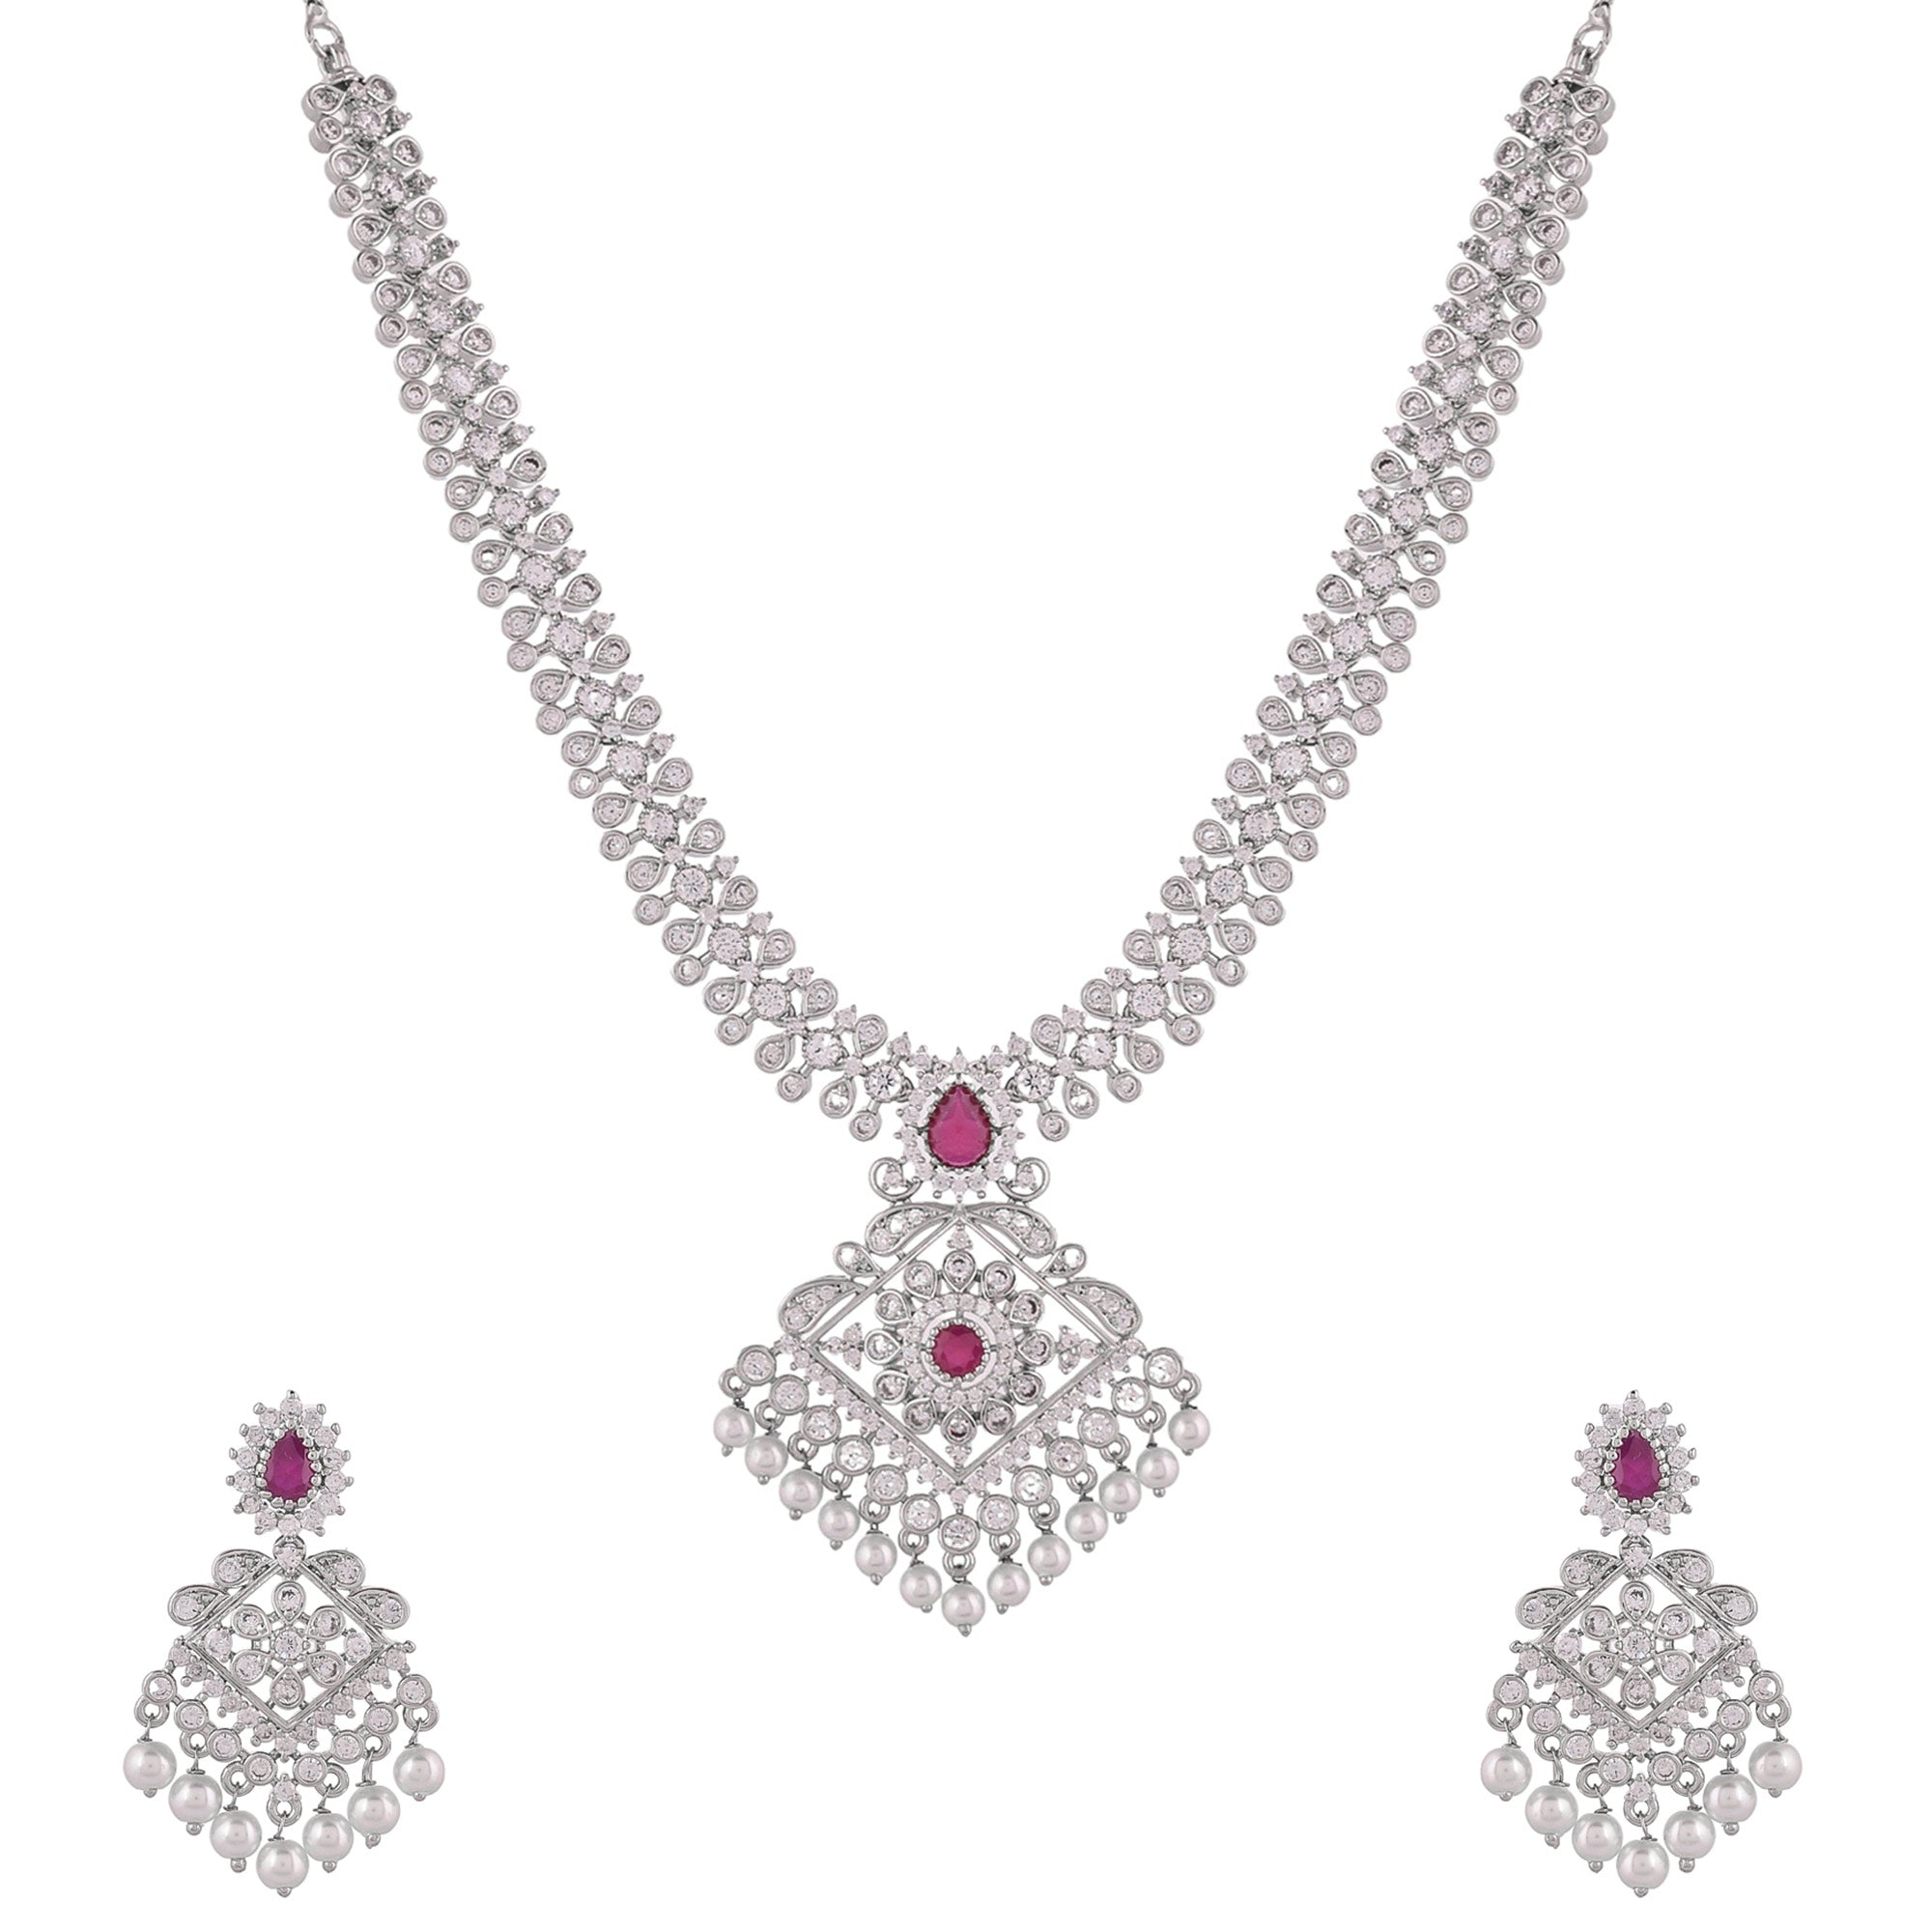 Oxidized Beautifully Crafted Cubic Zirconia Necklace Set